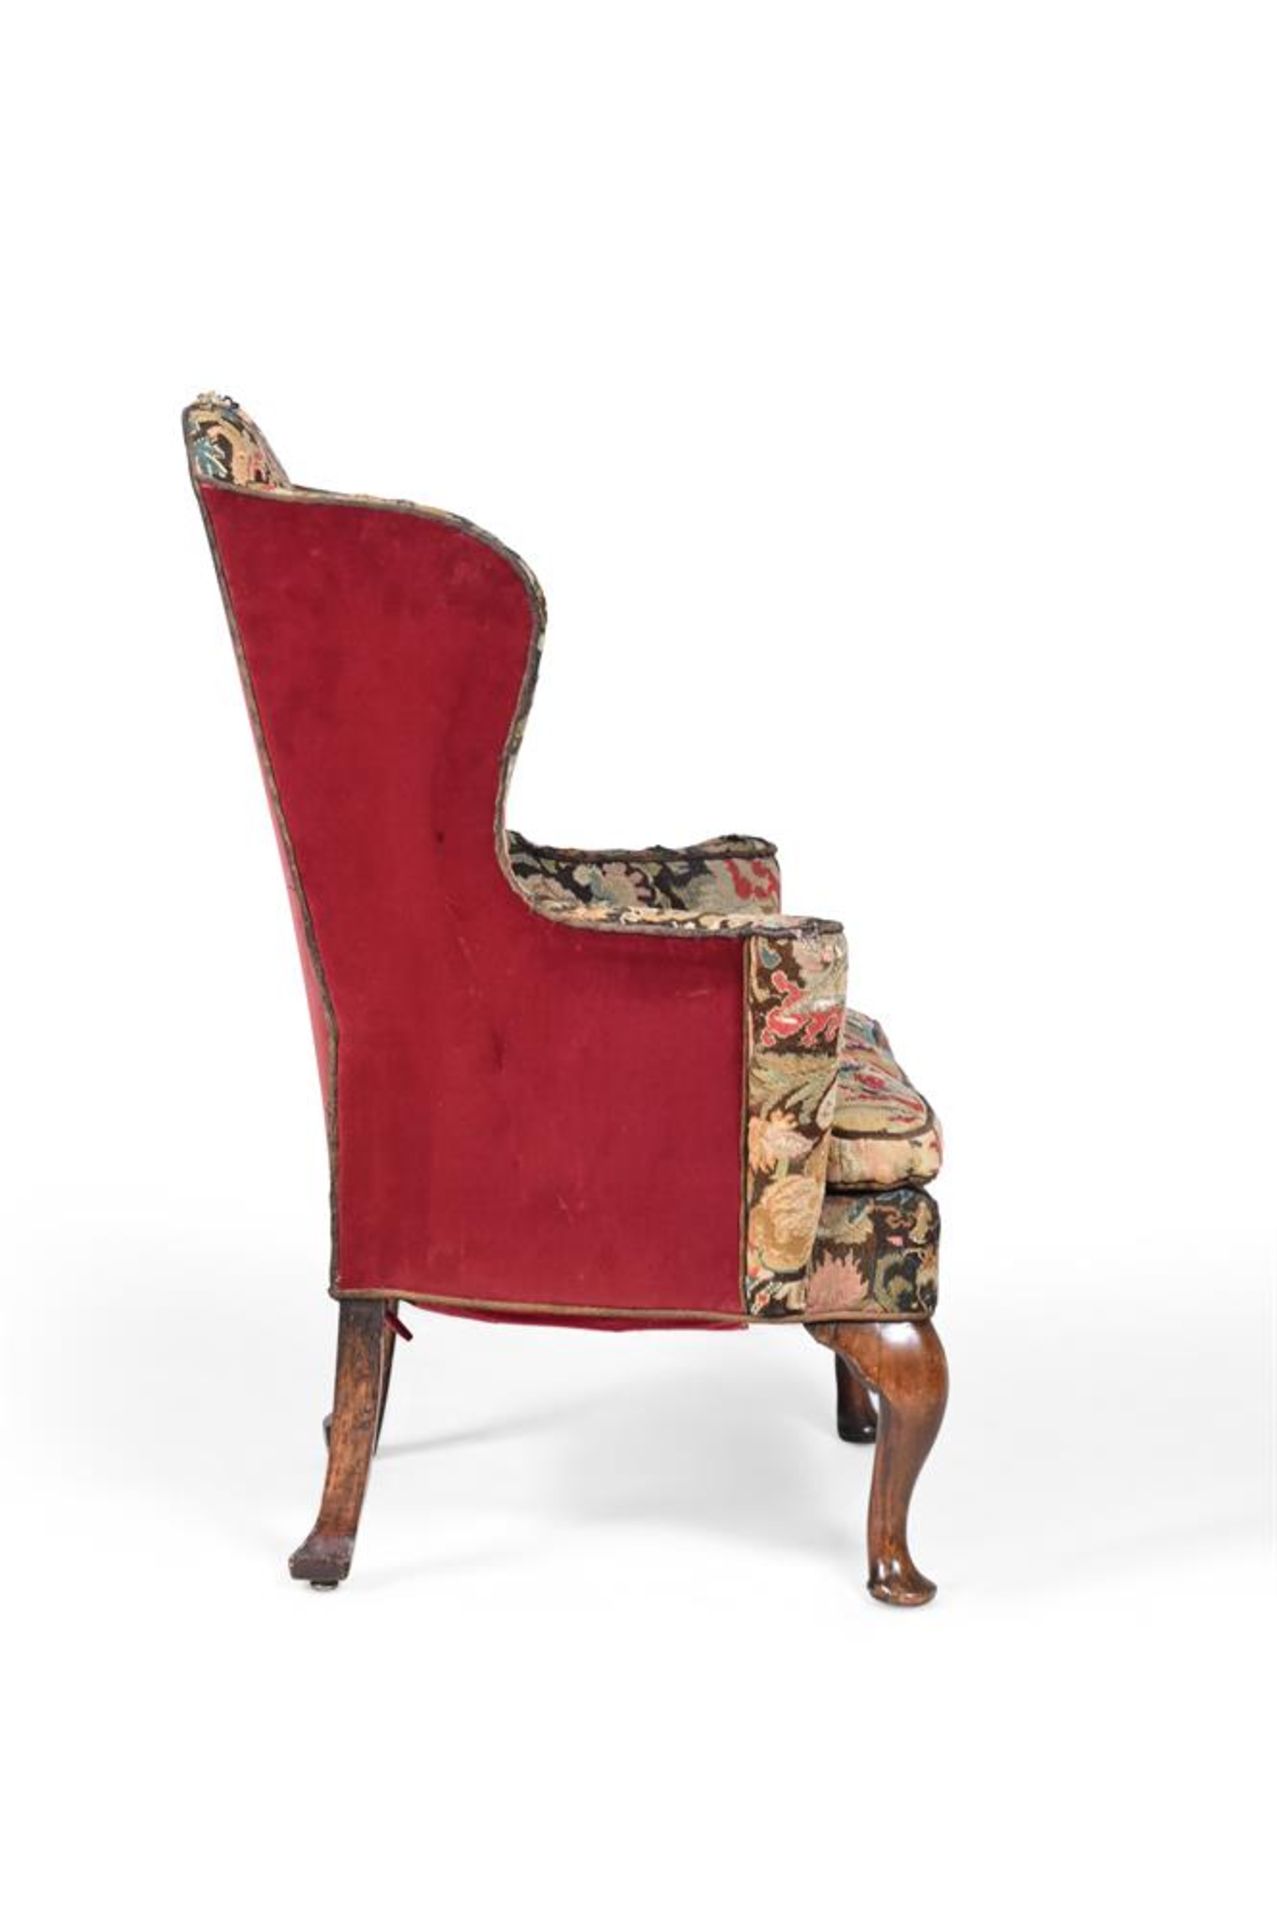 A WALNUT AND NEEDLEWORK UPHOLSTERED WING ARMCHAIR - Image 3 of 4